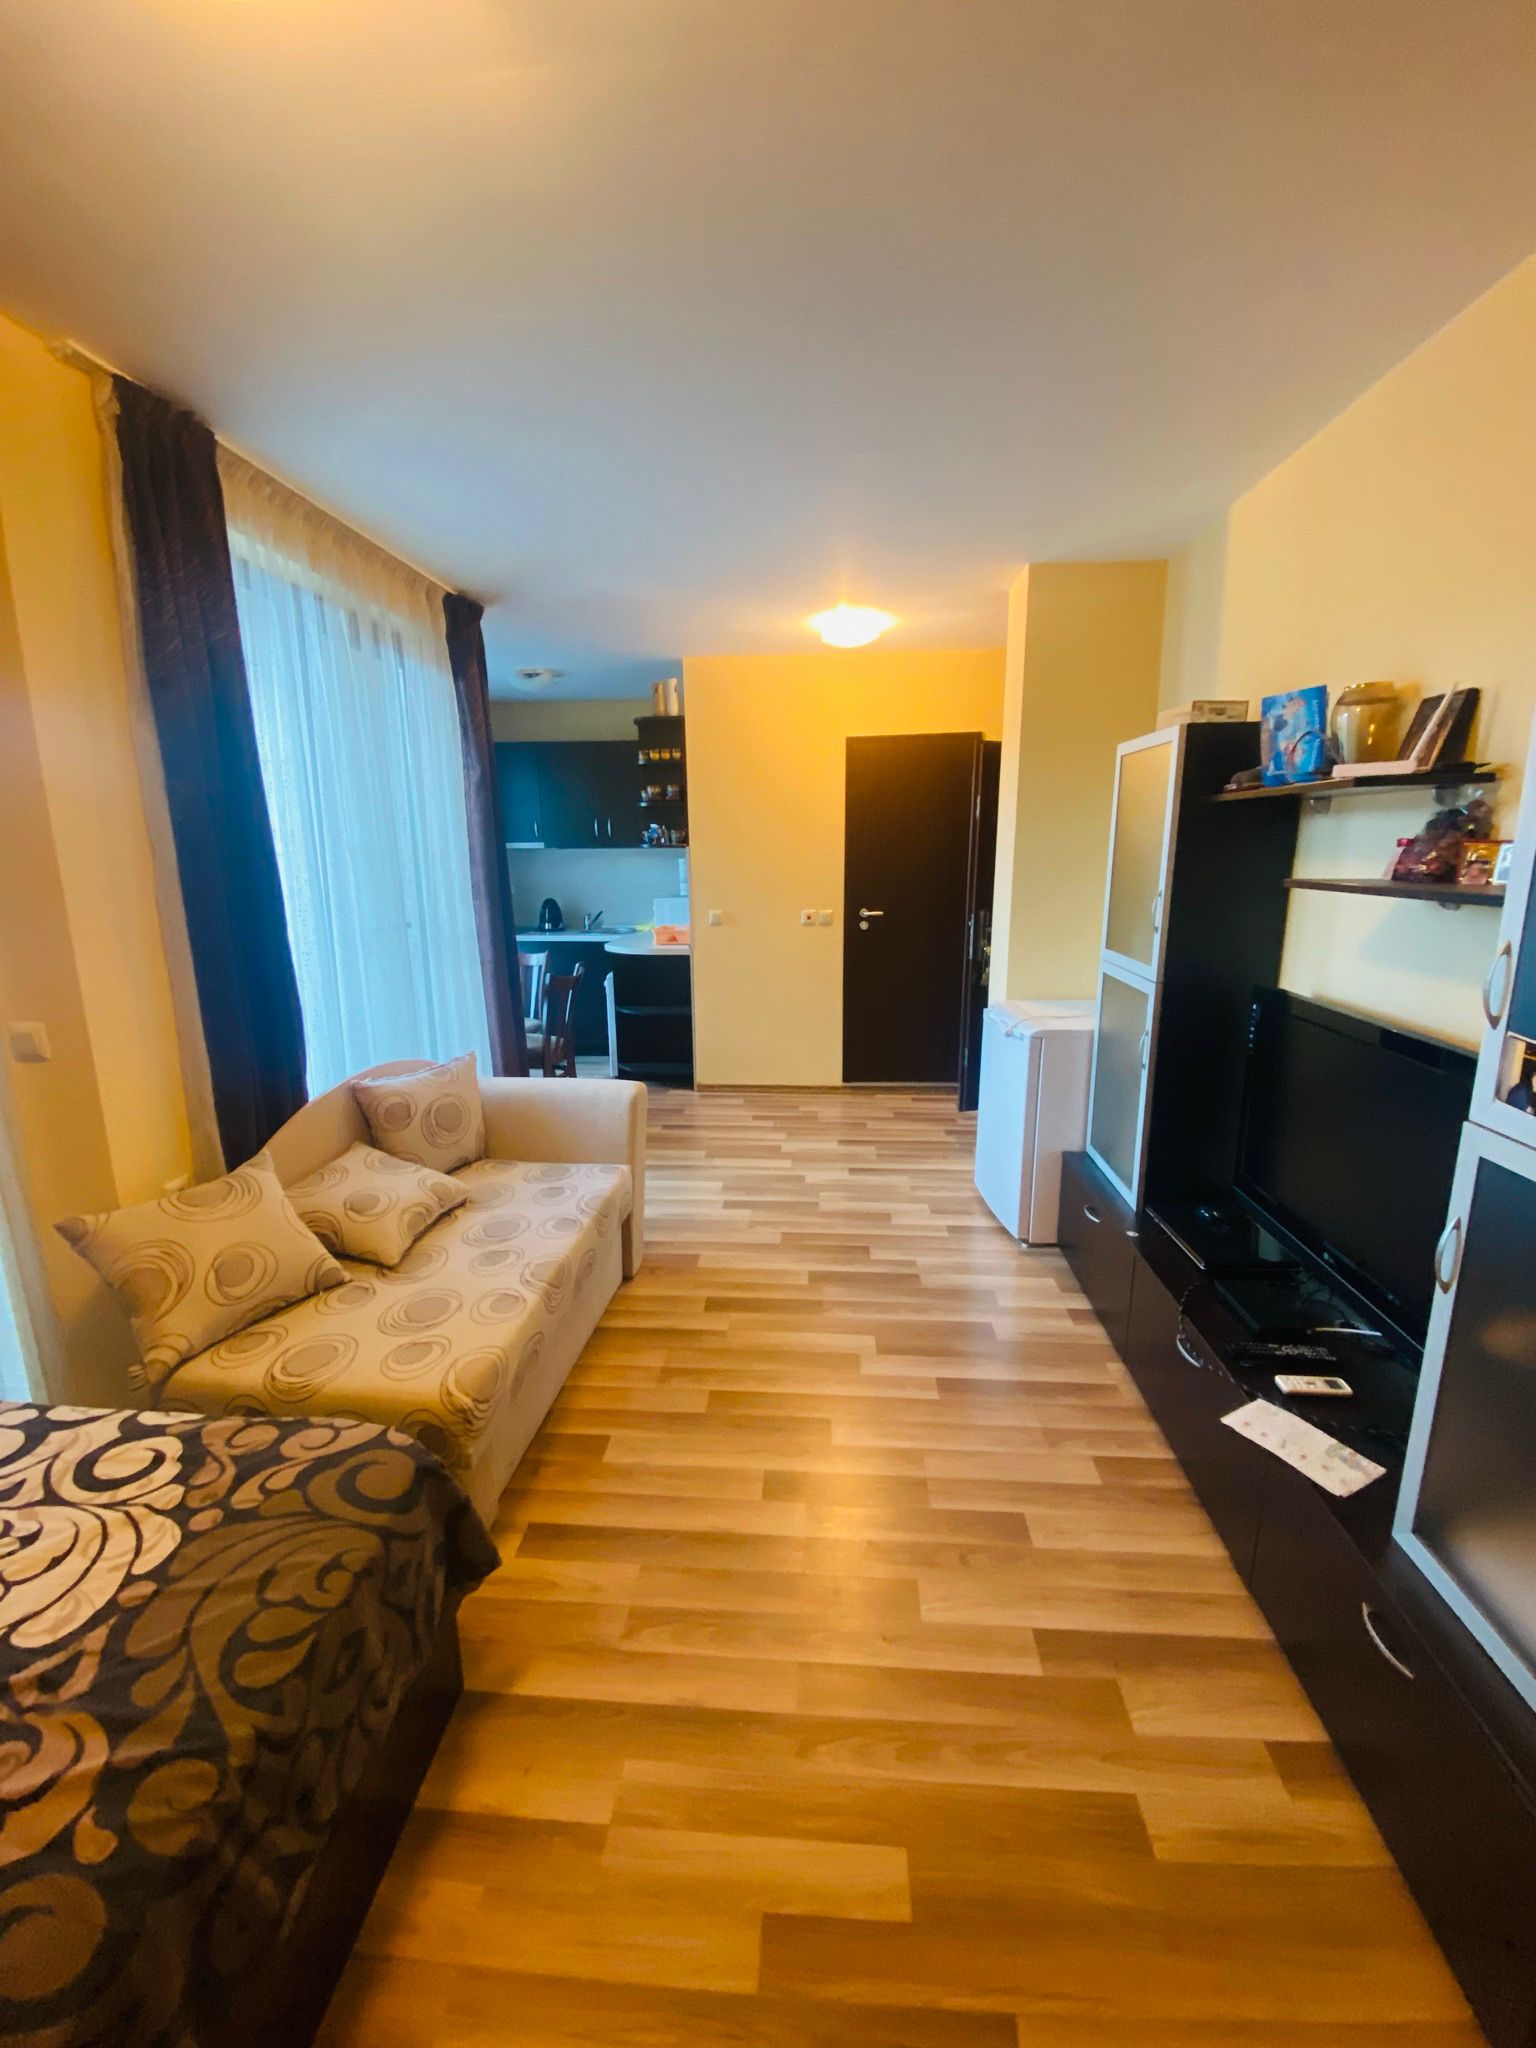 For Sale: Studio in the center of Sunny Beach